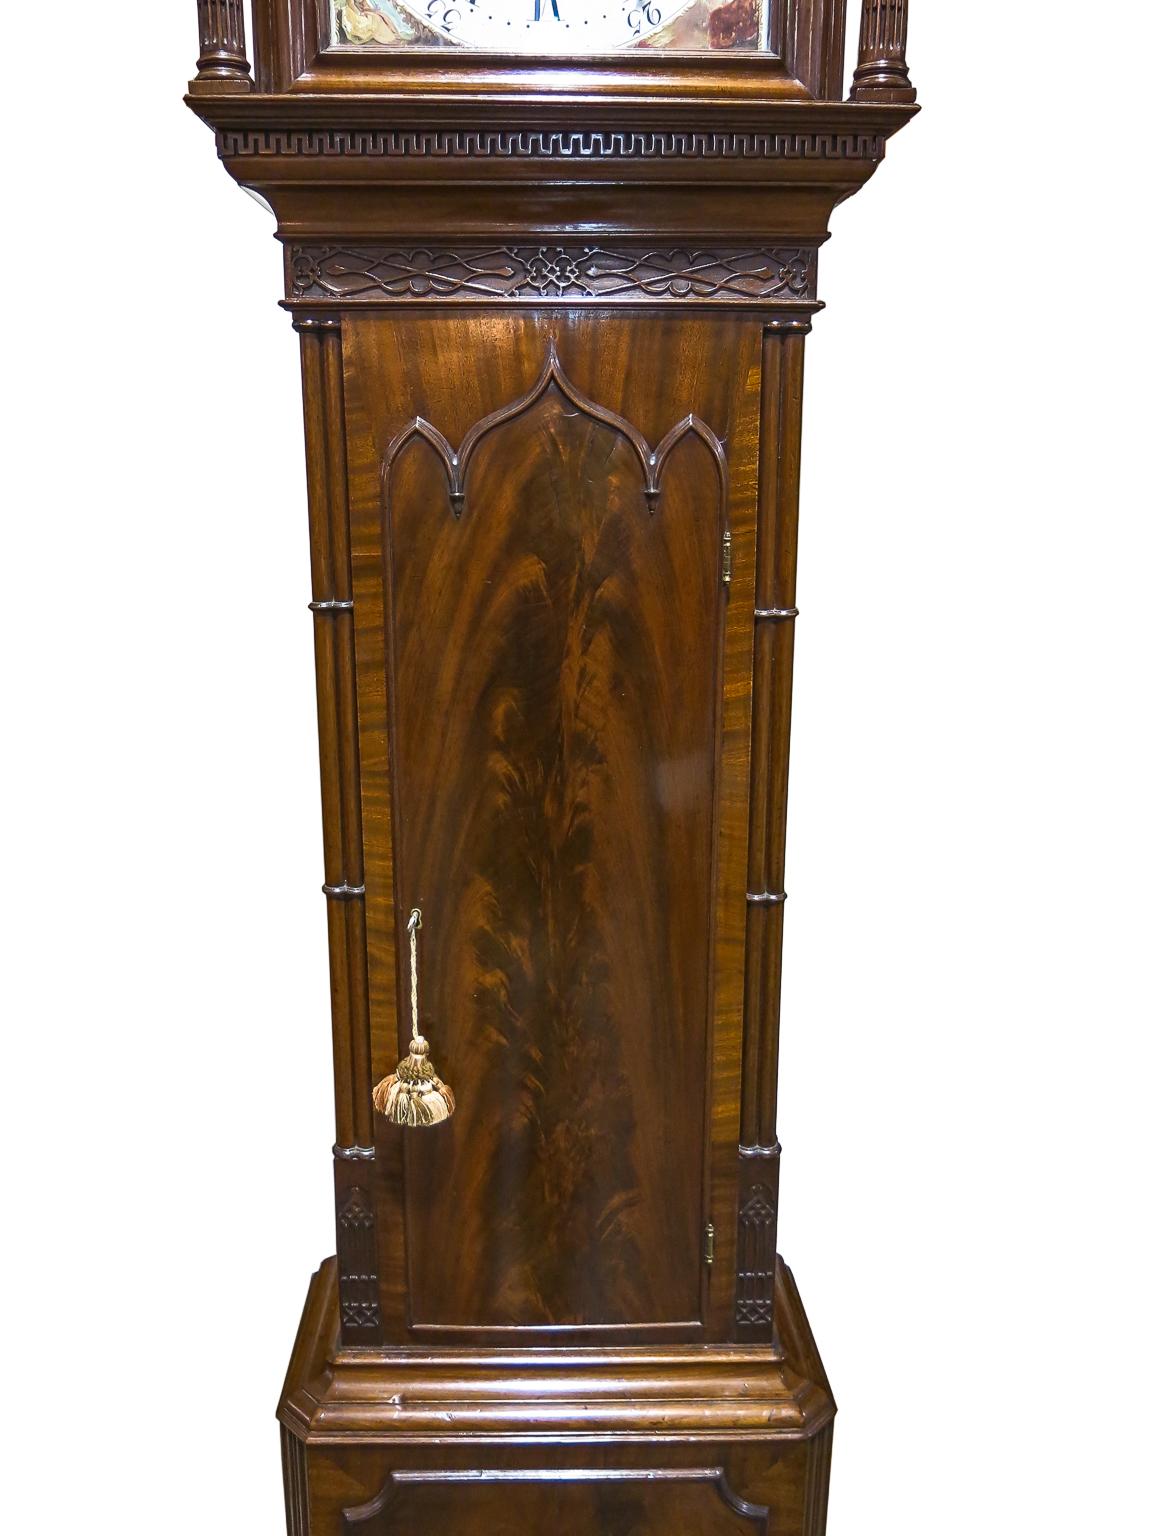 Chippendale 19th Century English Tall Case Clock